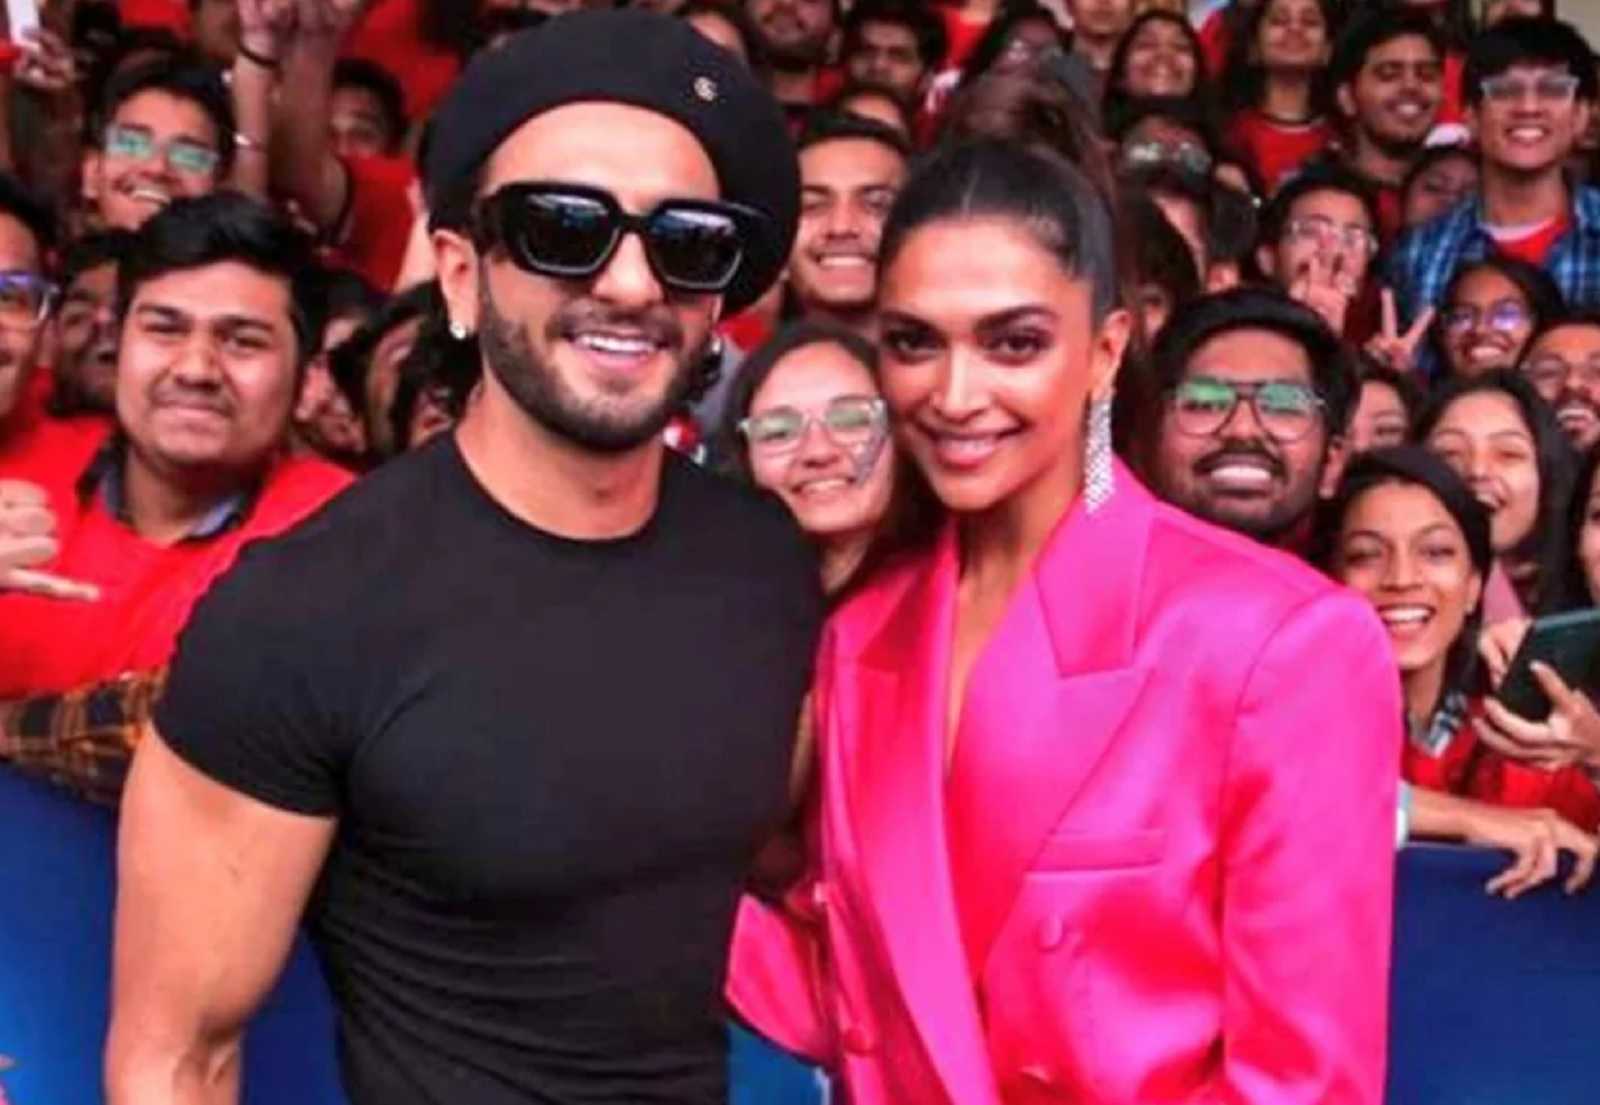 Deepika and Ranveer's rendition of iconic Chennai Express dialogue will make you wish for a sequel with Meenamma